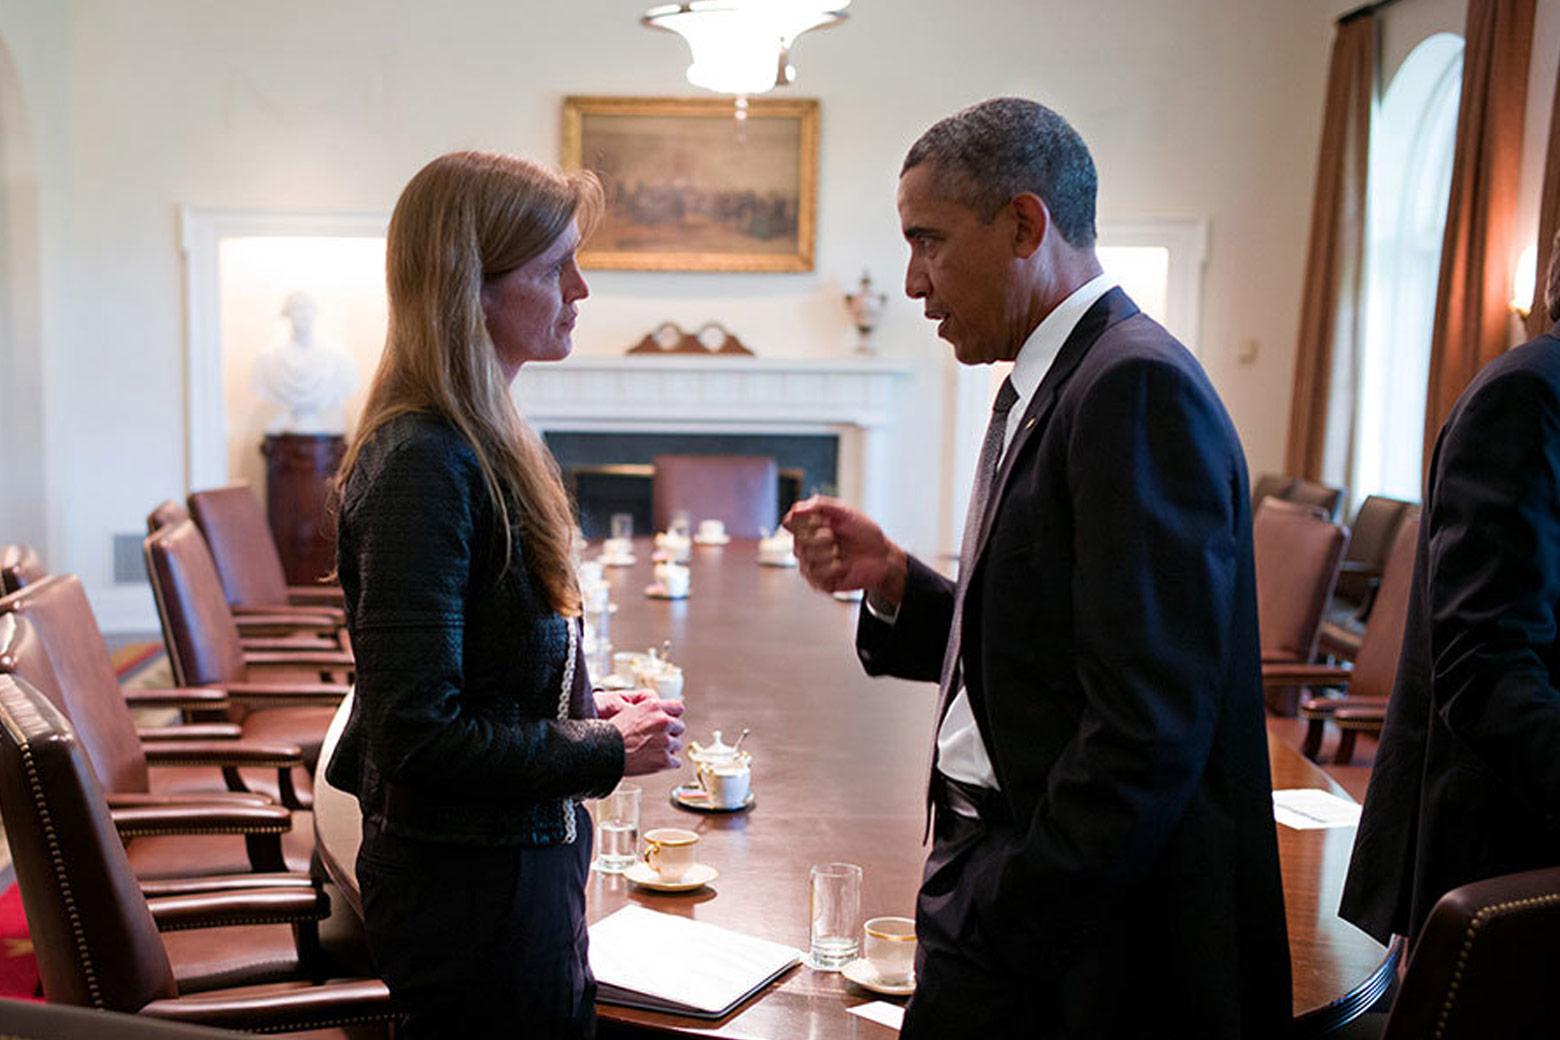 President Obama speaks with Samantha Power in a scene from The Final Year.